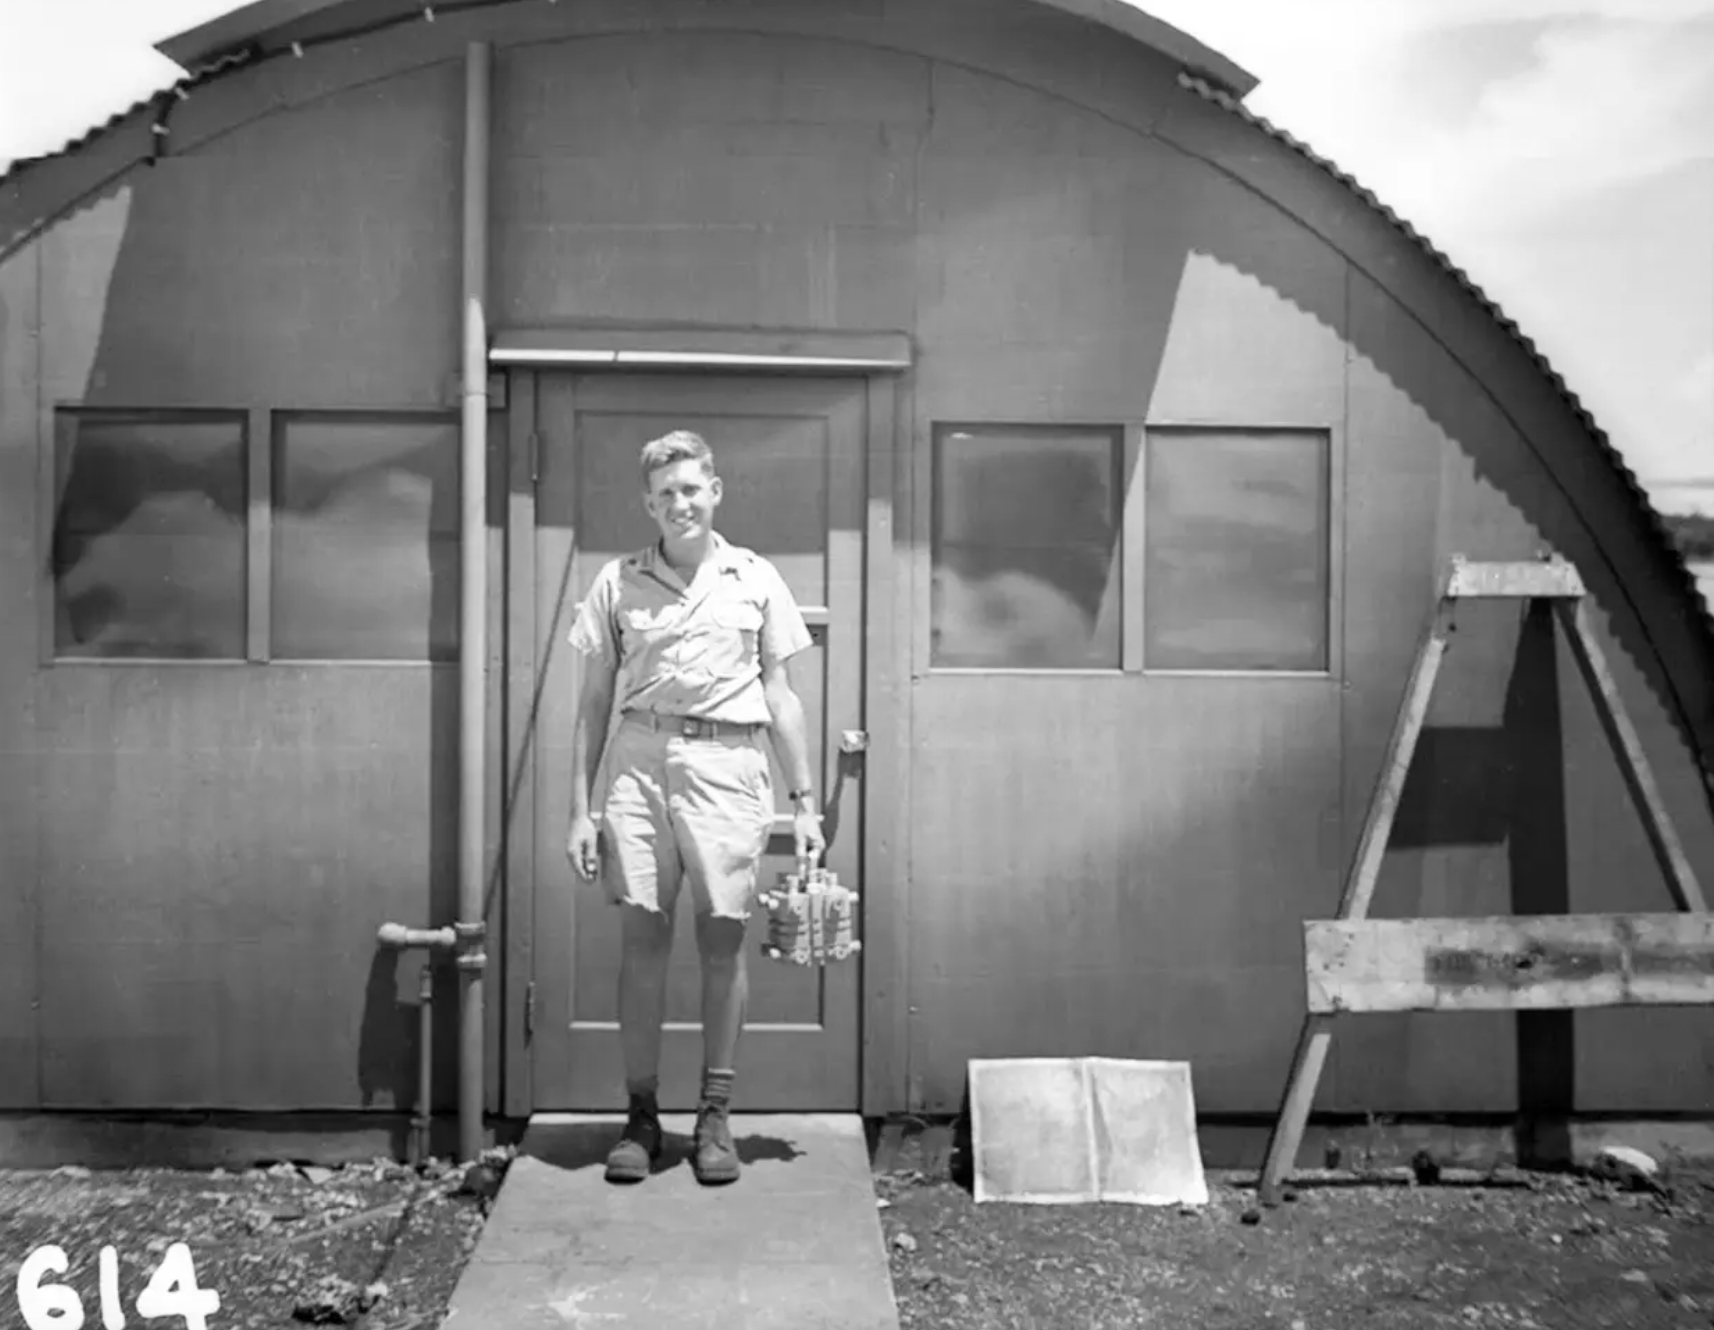 This Physicist, Harold Agnew, is holding the nuclear core of the Fat Man atomic bomb which was dropped on Nagasaki.